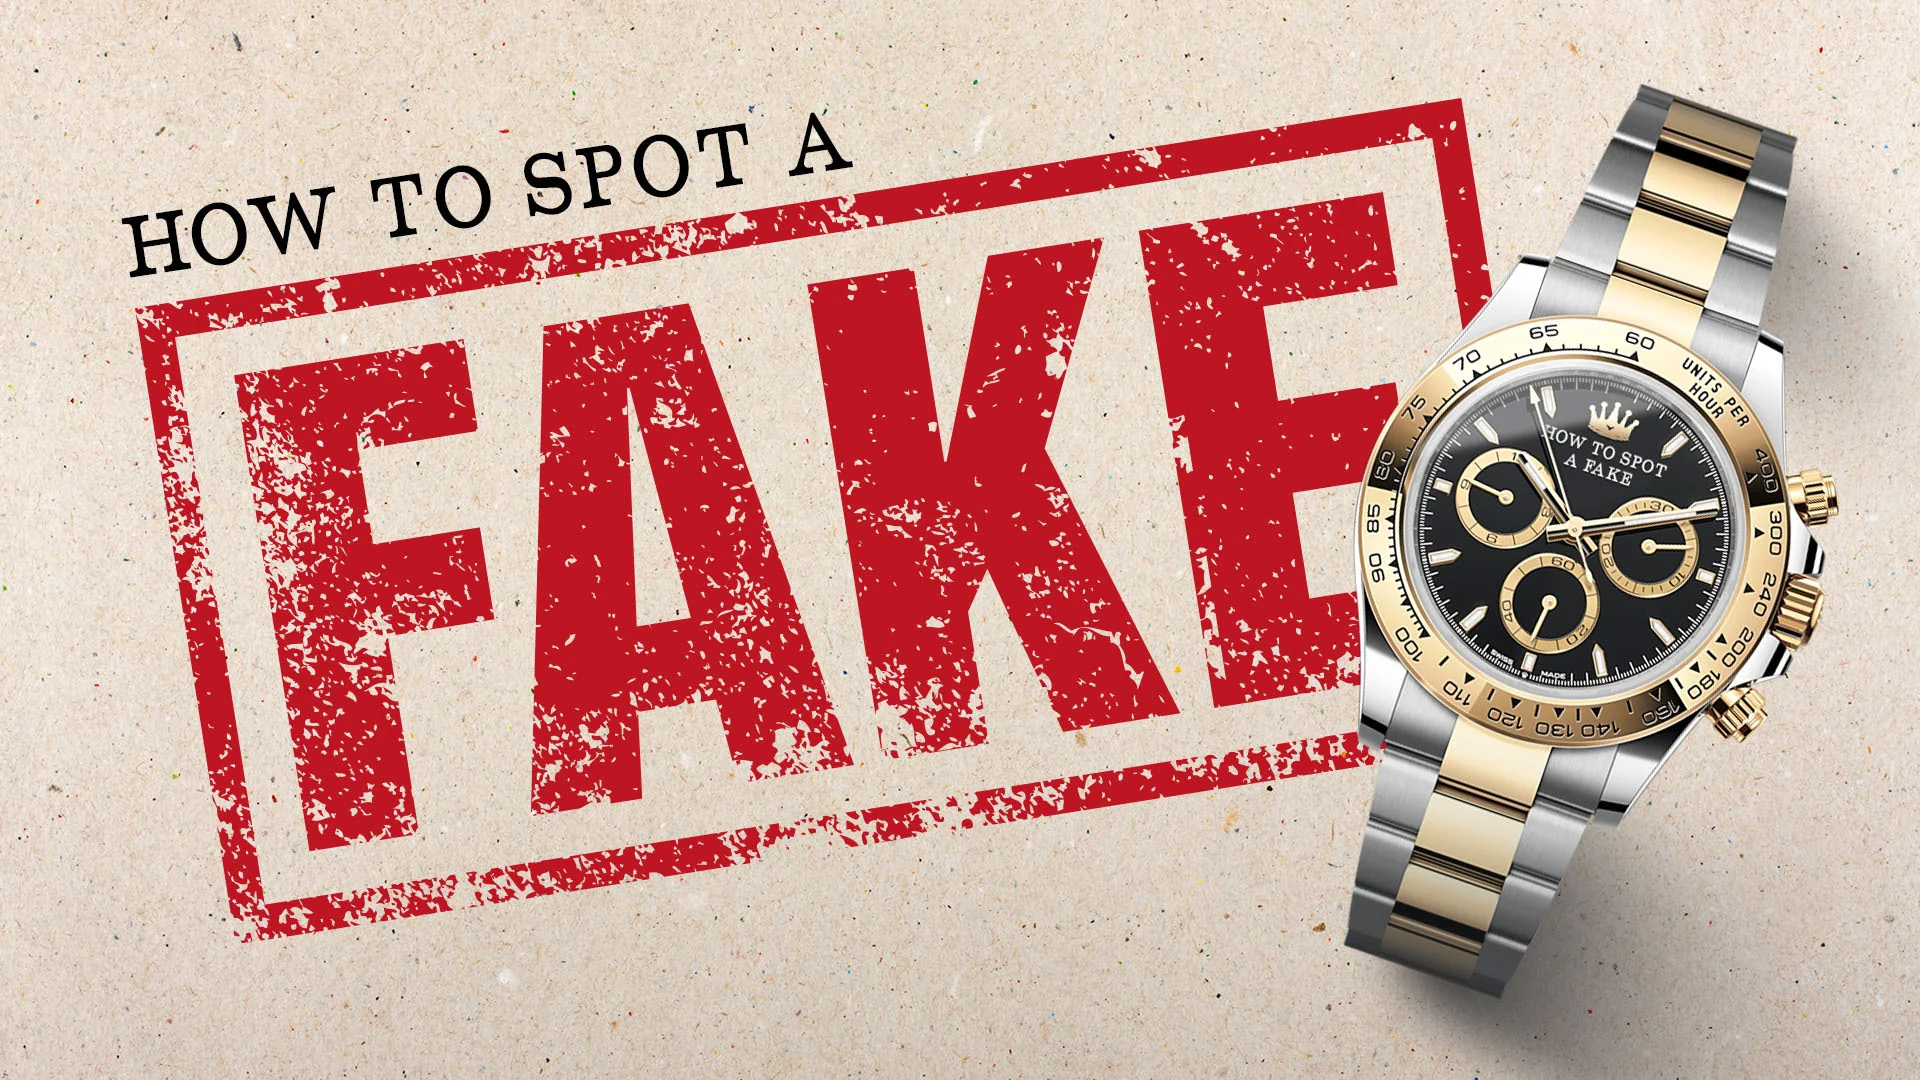 Spellings are clue: Watches are fake